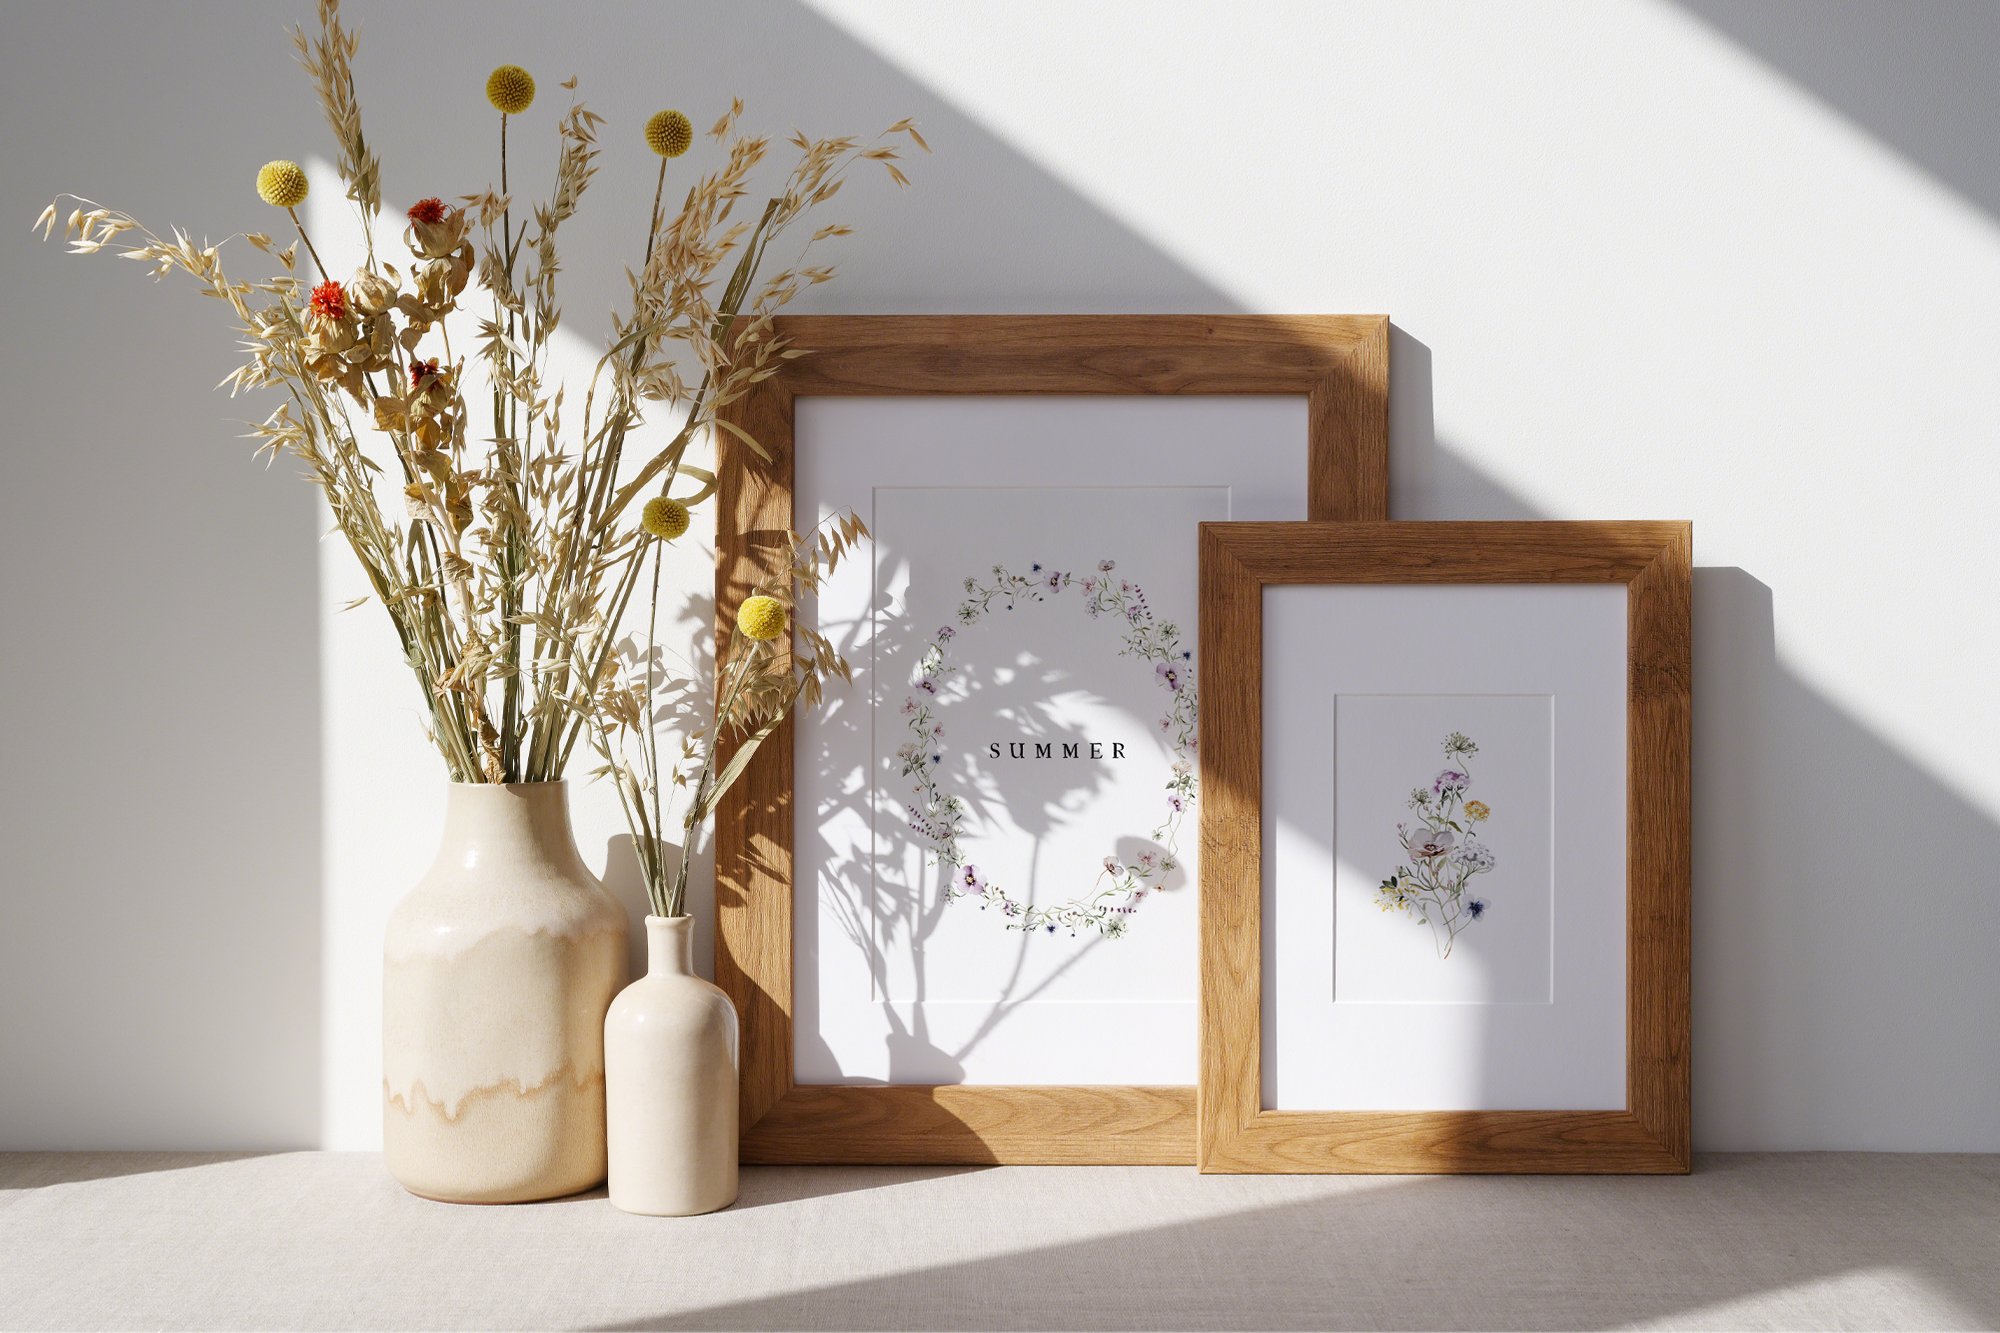 Two posters with flowers and in wooden frames.